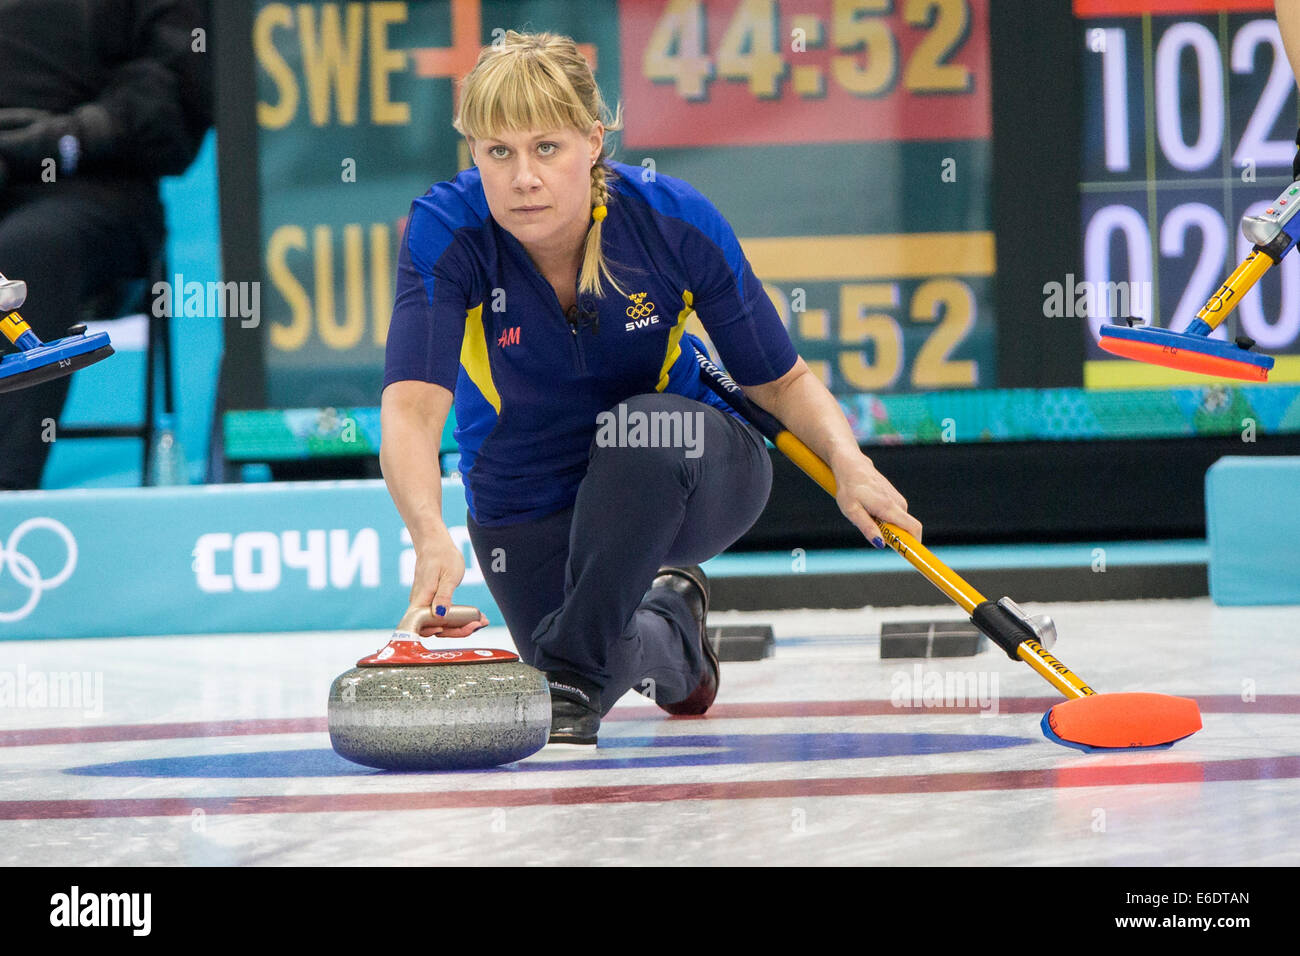 Maria Prytz of Team Sweden plays a stone during  Women's curling competition at the Olympic Winter Games, Sochi 2014 Stock Photo